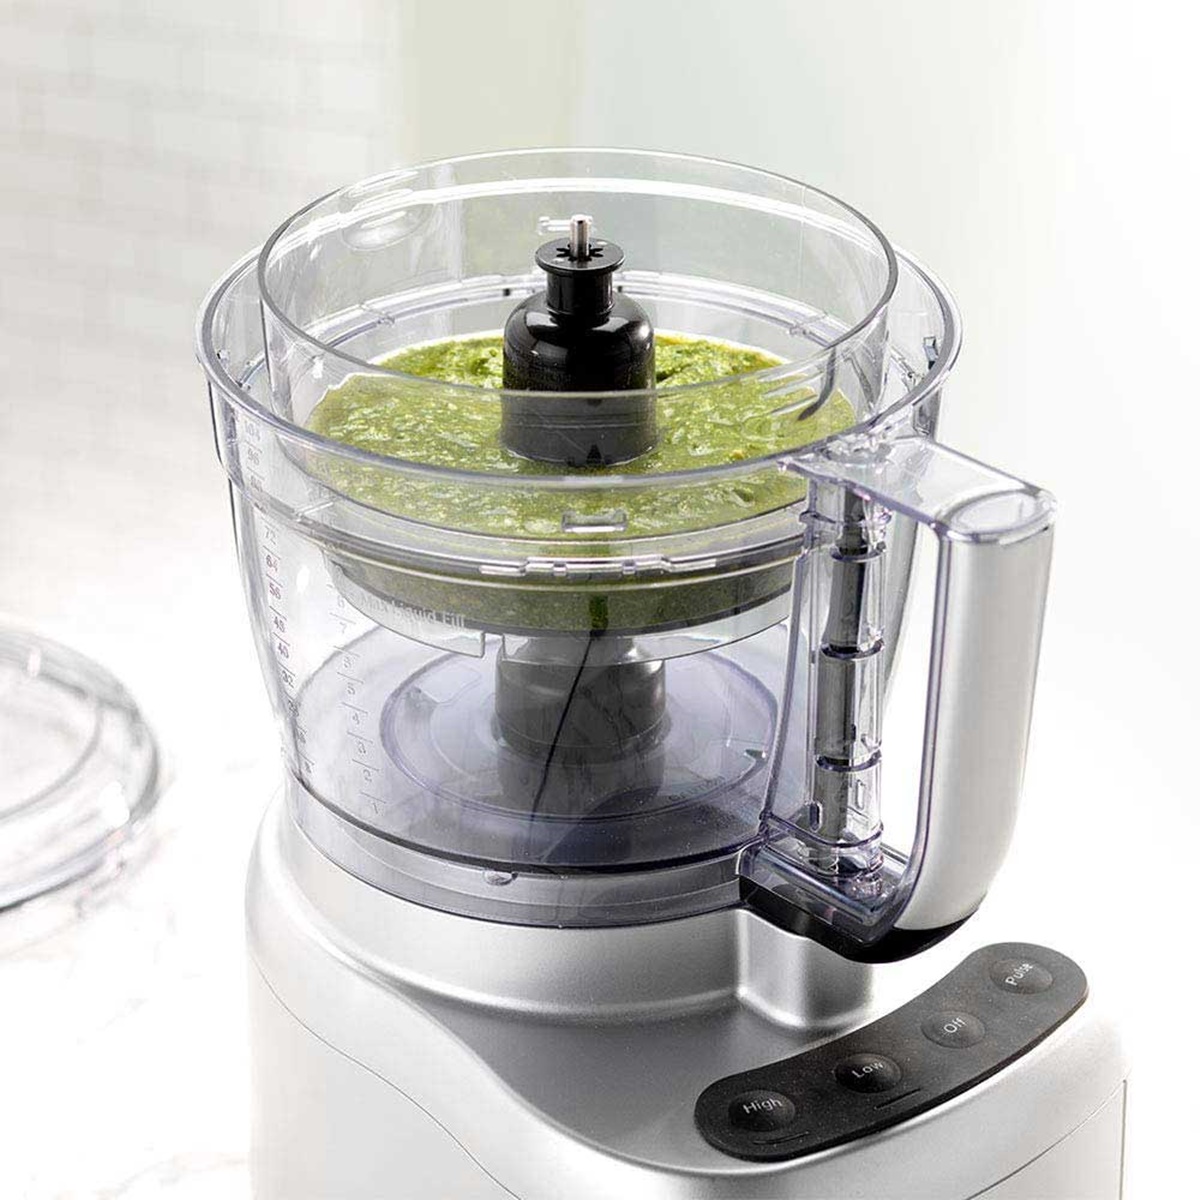 https://recipes.net/wp-content/uploads/2023/10/how-to-chop-celery-in-a-cuisinart-pro-food-processor-1697469348.jpg